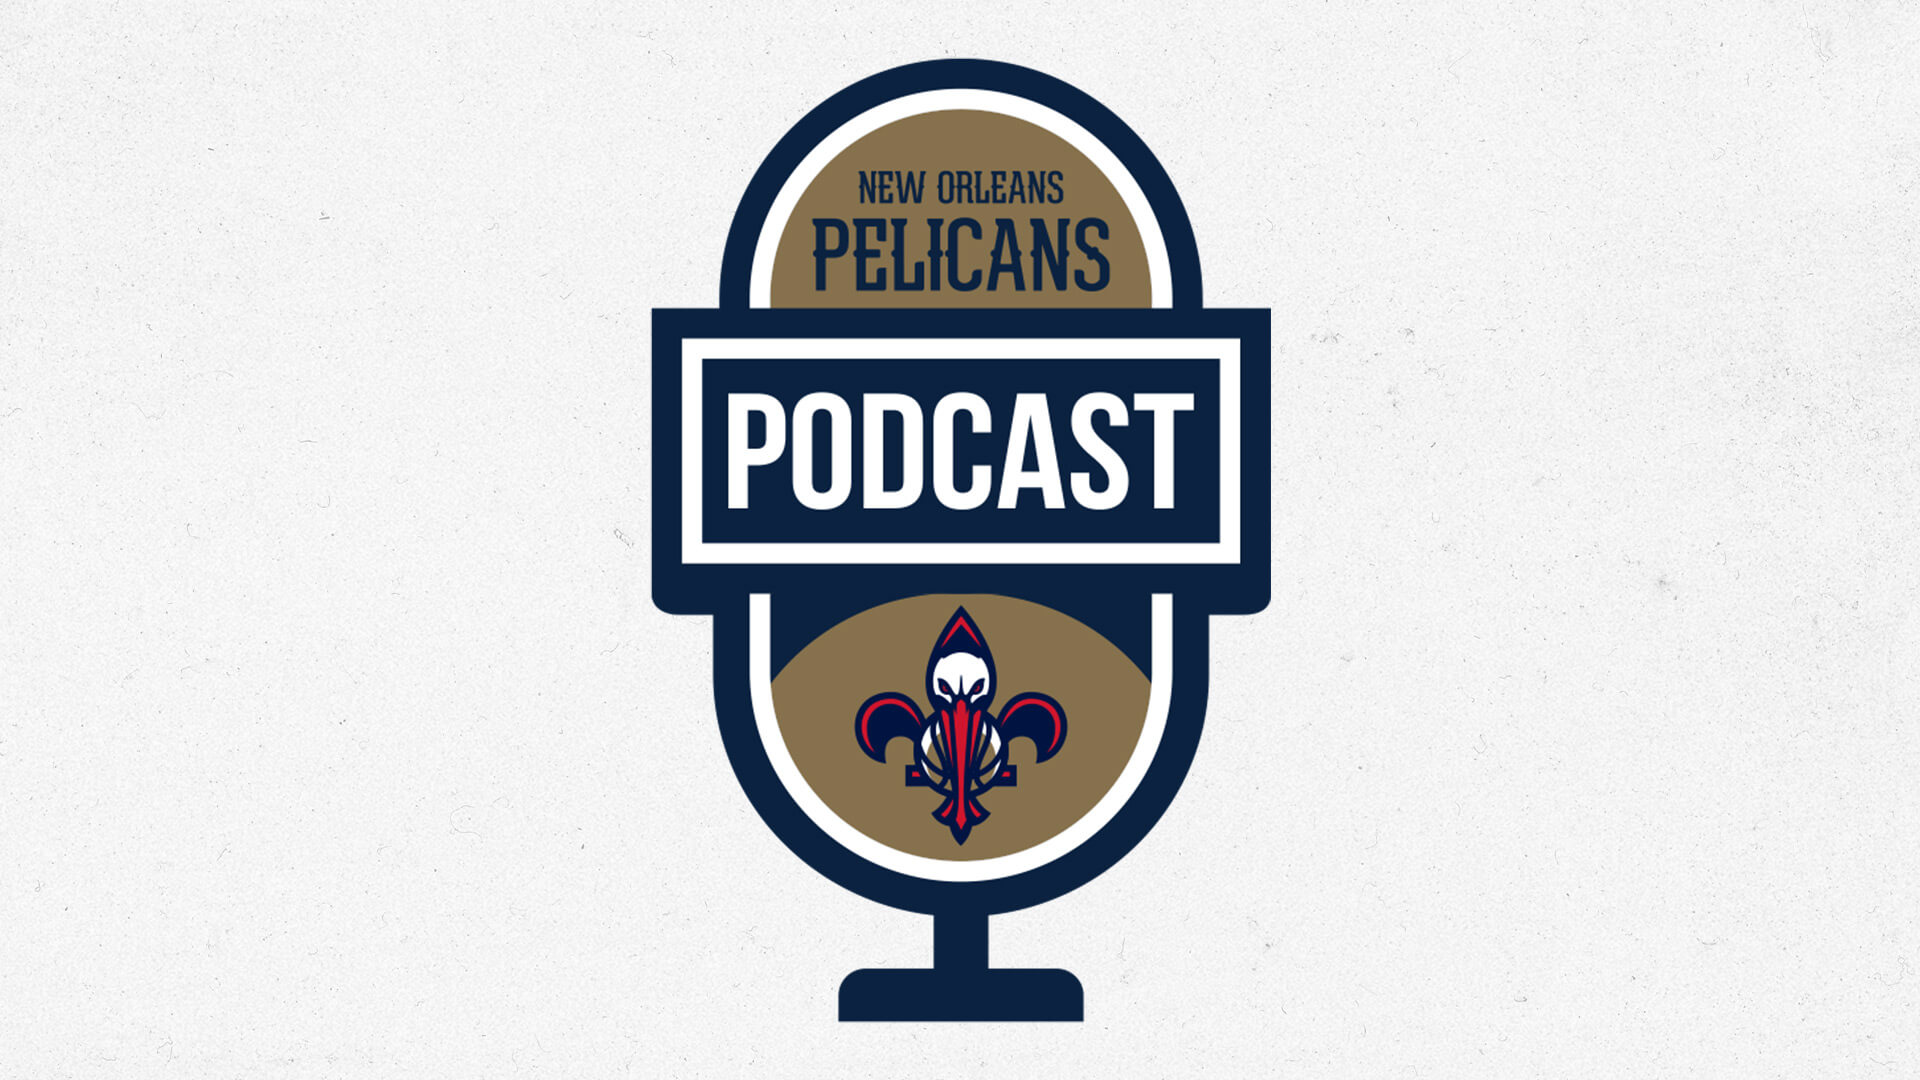 ESPN Nick Friedell on Brooklyn Nets, interview with Jose Alvarado | Pelicans Podcast